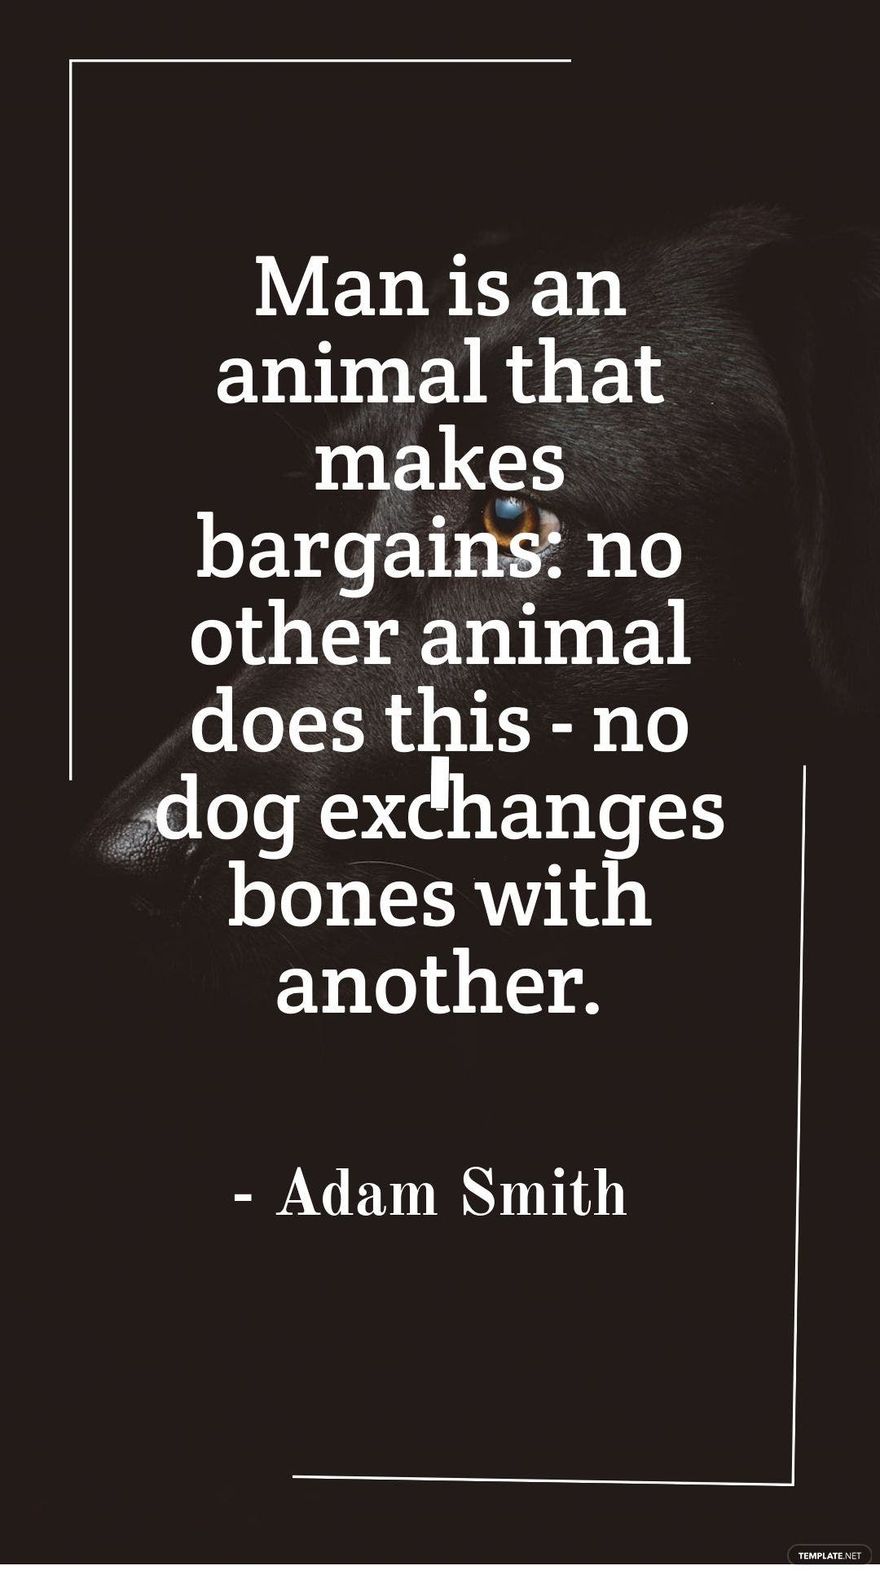 Free Adam Smith - Man is an animal that makes bargains: no other animal does this - no dog exchanges bones with another. in JPG